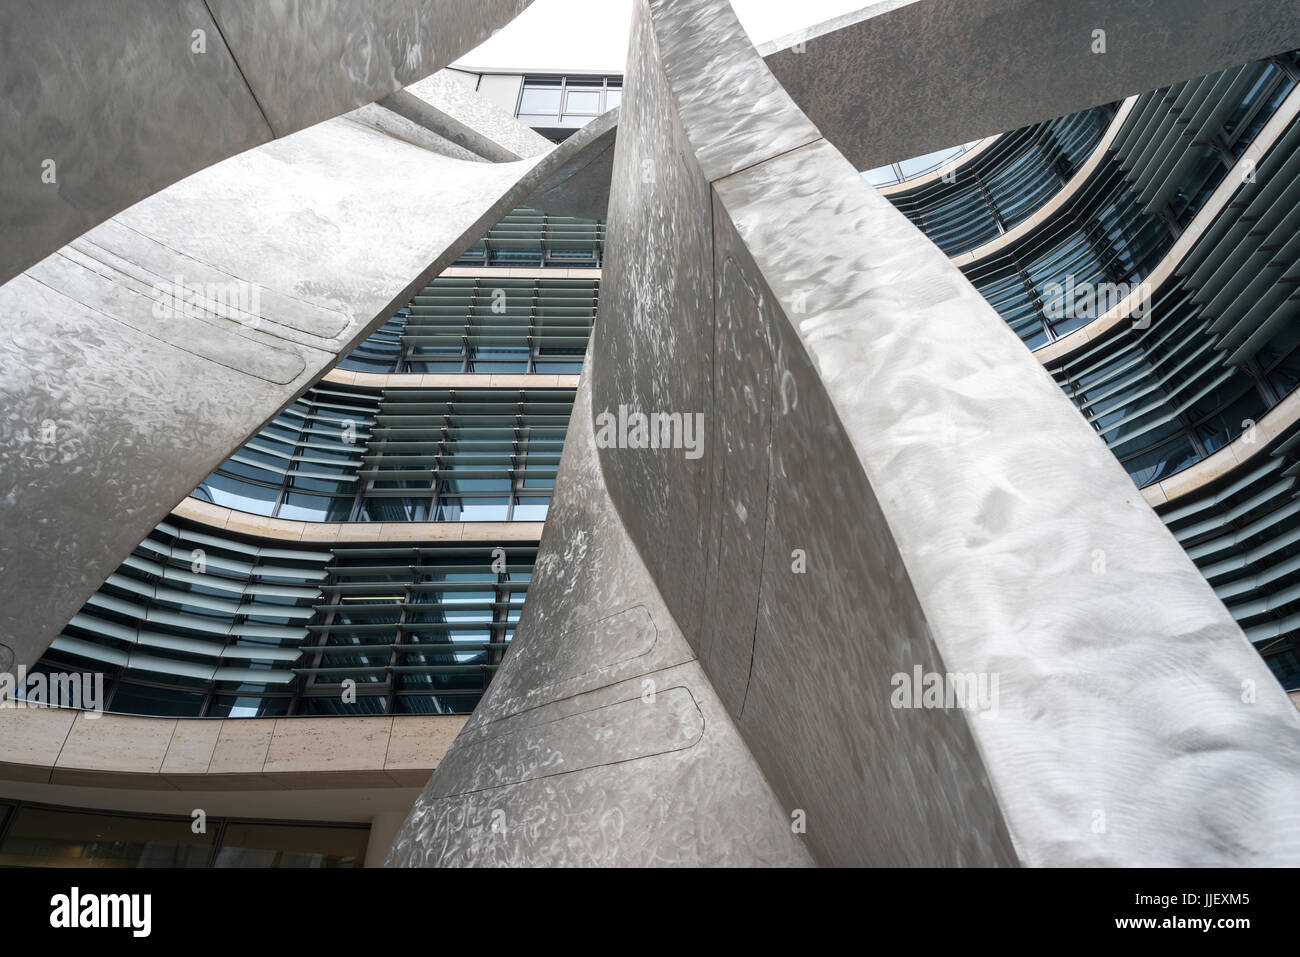 Muenchen, Germany, sculpture in the entrance area of   the SiemensForum Stock Photo